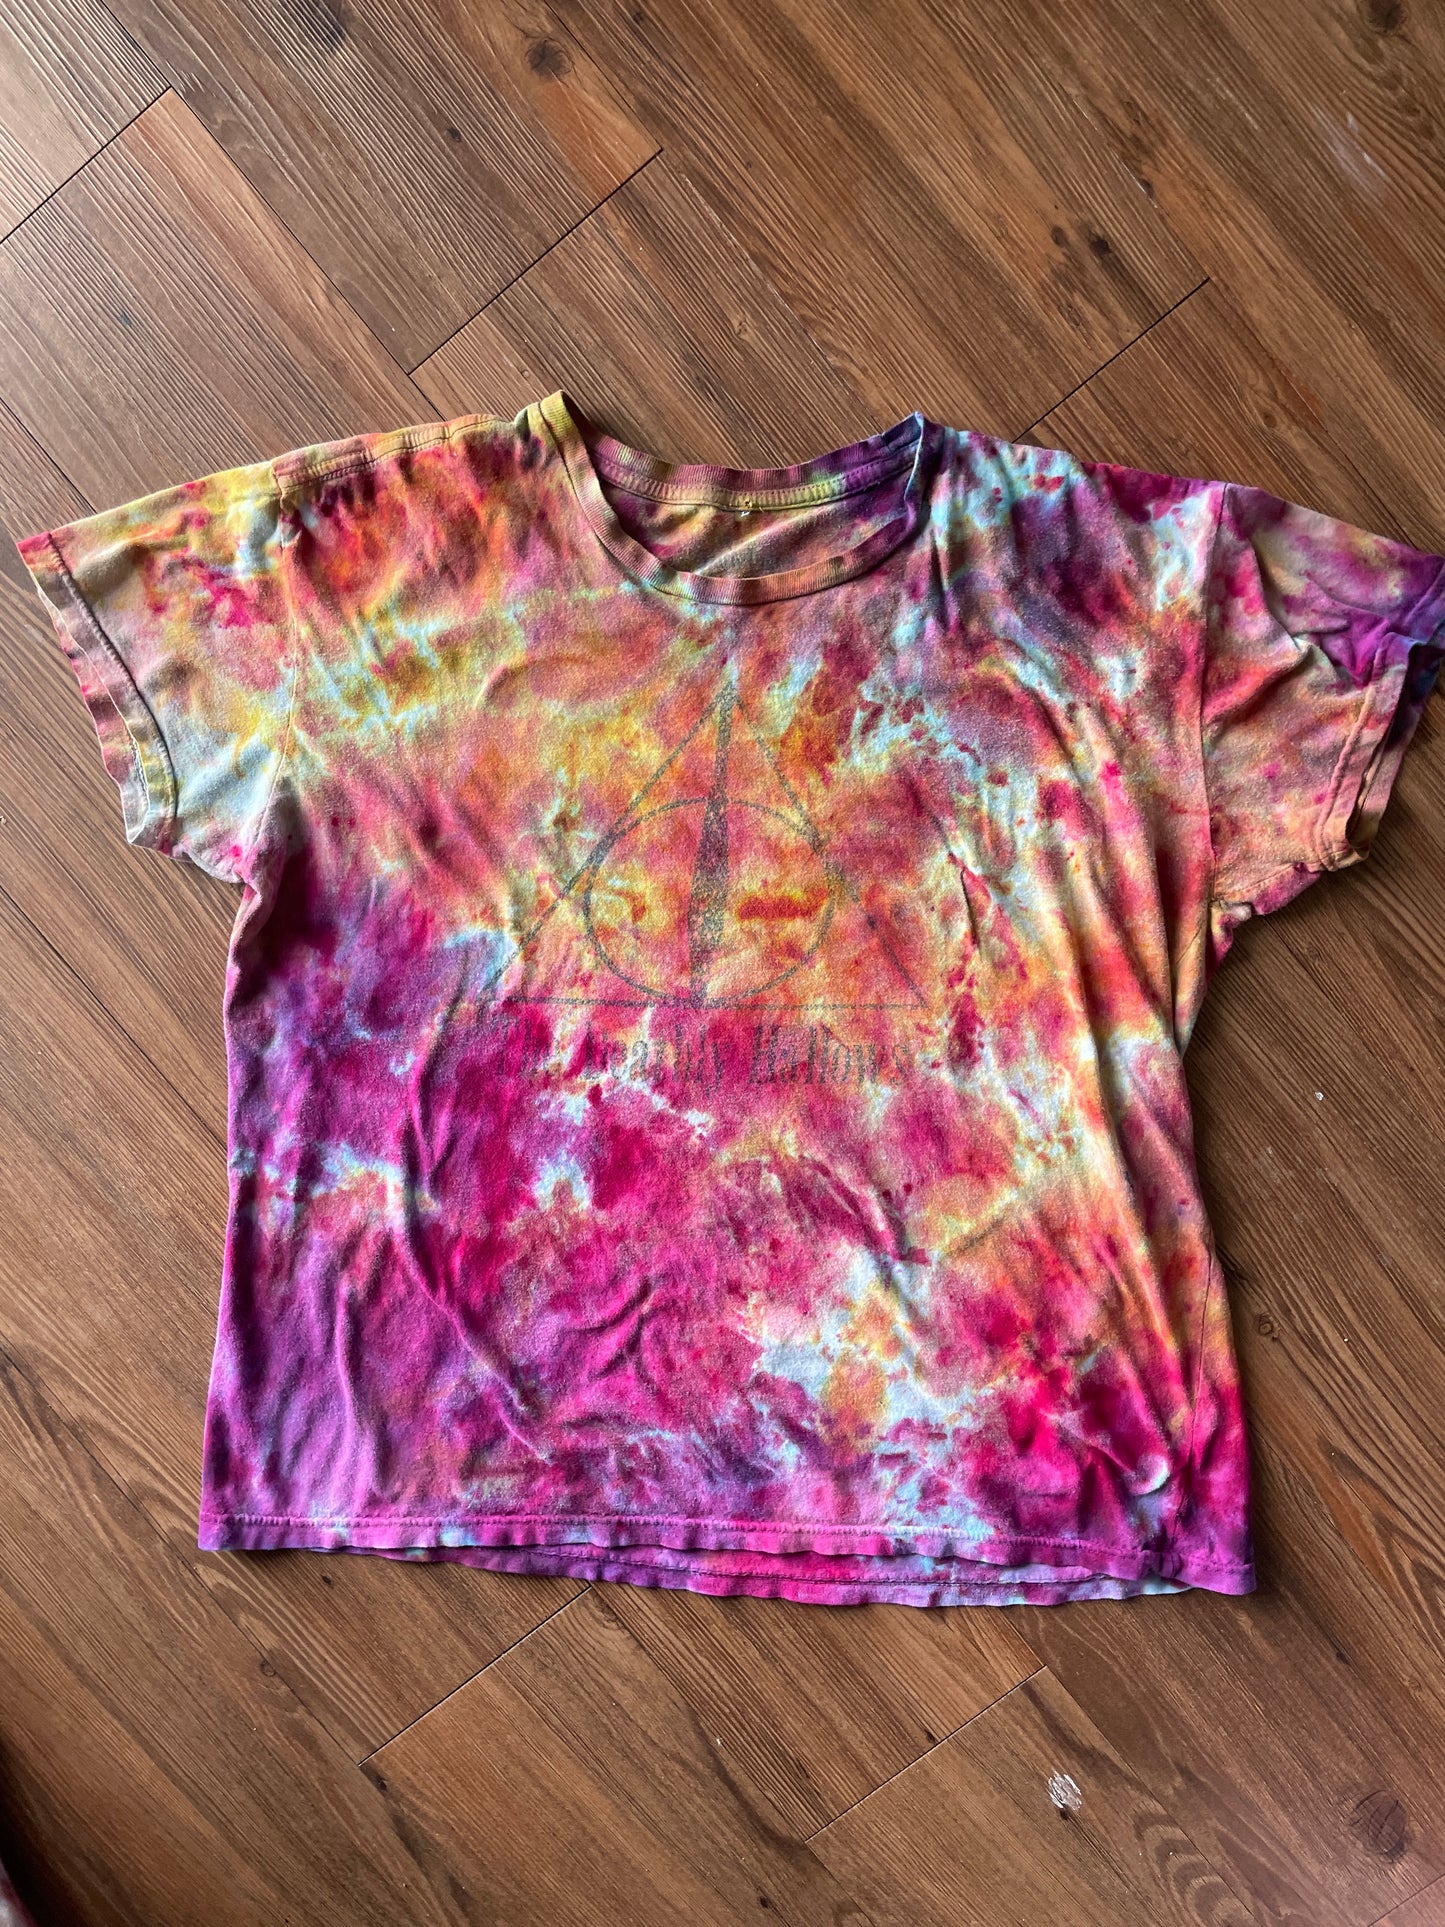 Large Women’s Harry Potter and The Deathly Hallows Galaxy Handmade Tie Dye T-Shirt | One-Of-a-Kind Pink and Orange Snow Dyed Short Sleeve